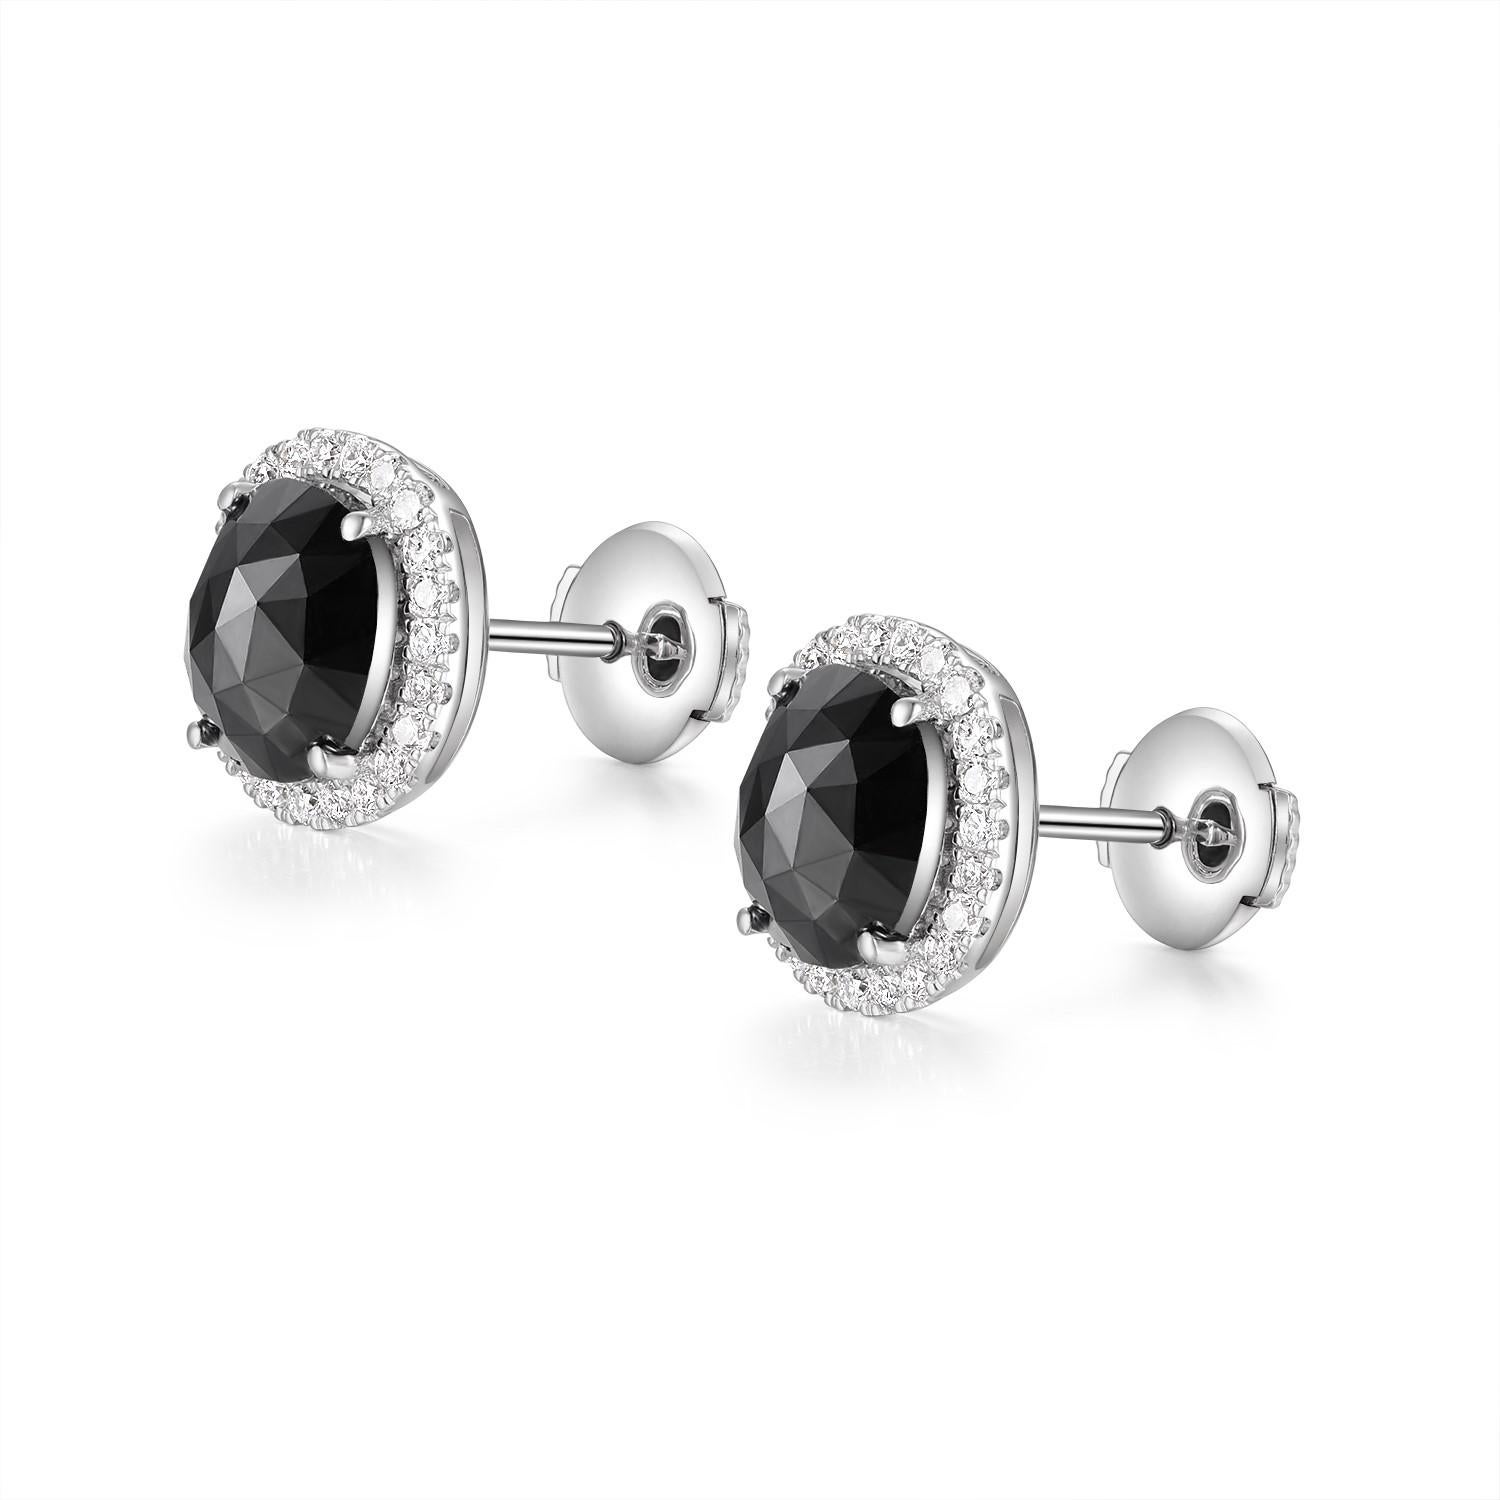 These sophisticated stud earrings present a striking combination of elegance and modern design, featuring 2.29 carats of rose-cut black diamonds at their core. Each diamond boasts a classic rose cut, which emphasizes the gem's natural sheen and